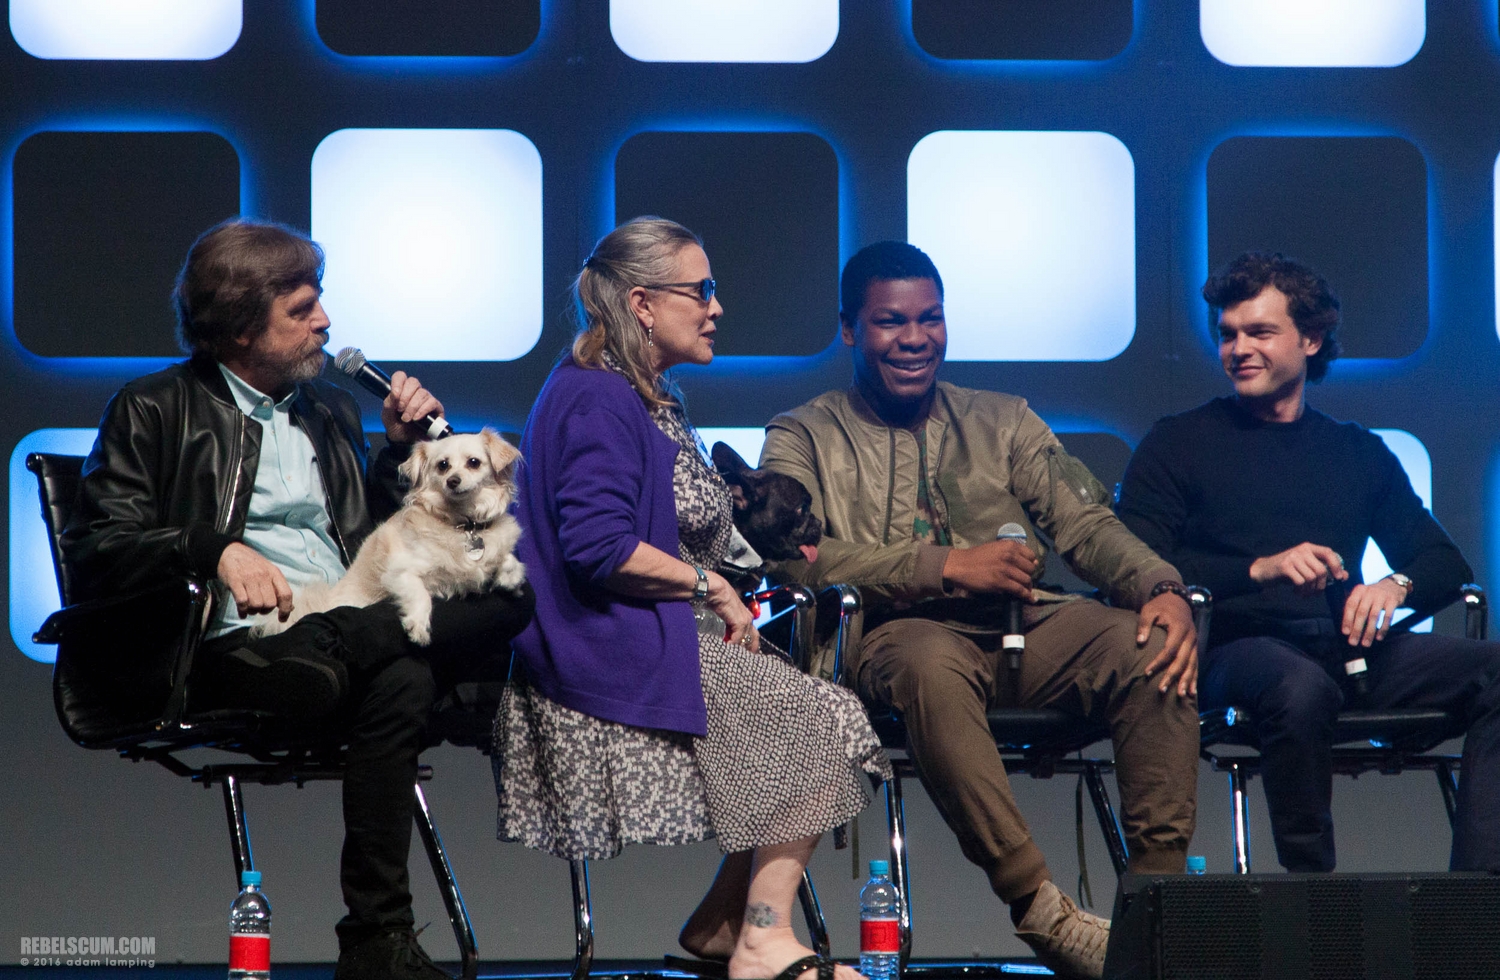 star-wars-celebration-2016-future-filmmakers-and-closing-ceremony-026.jpg